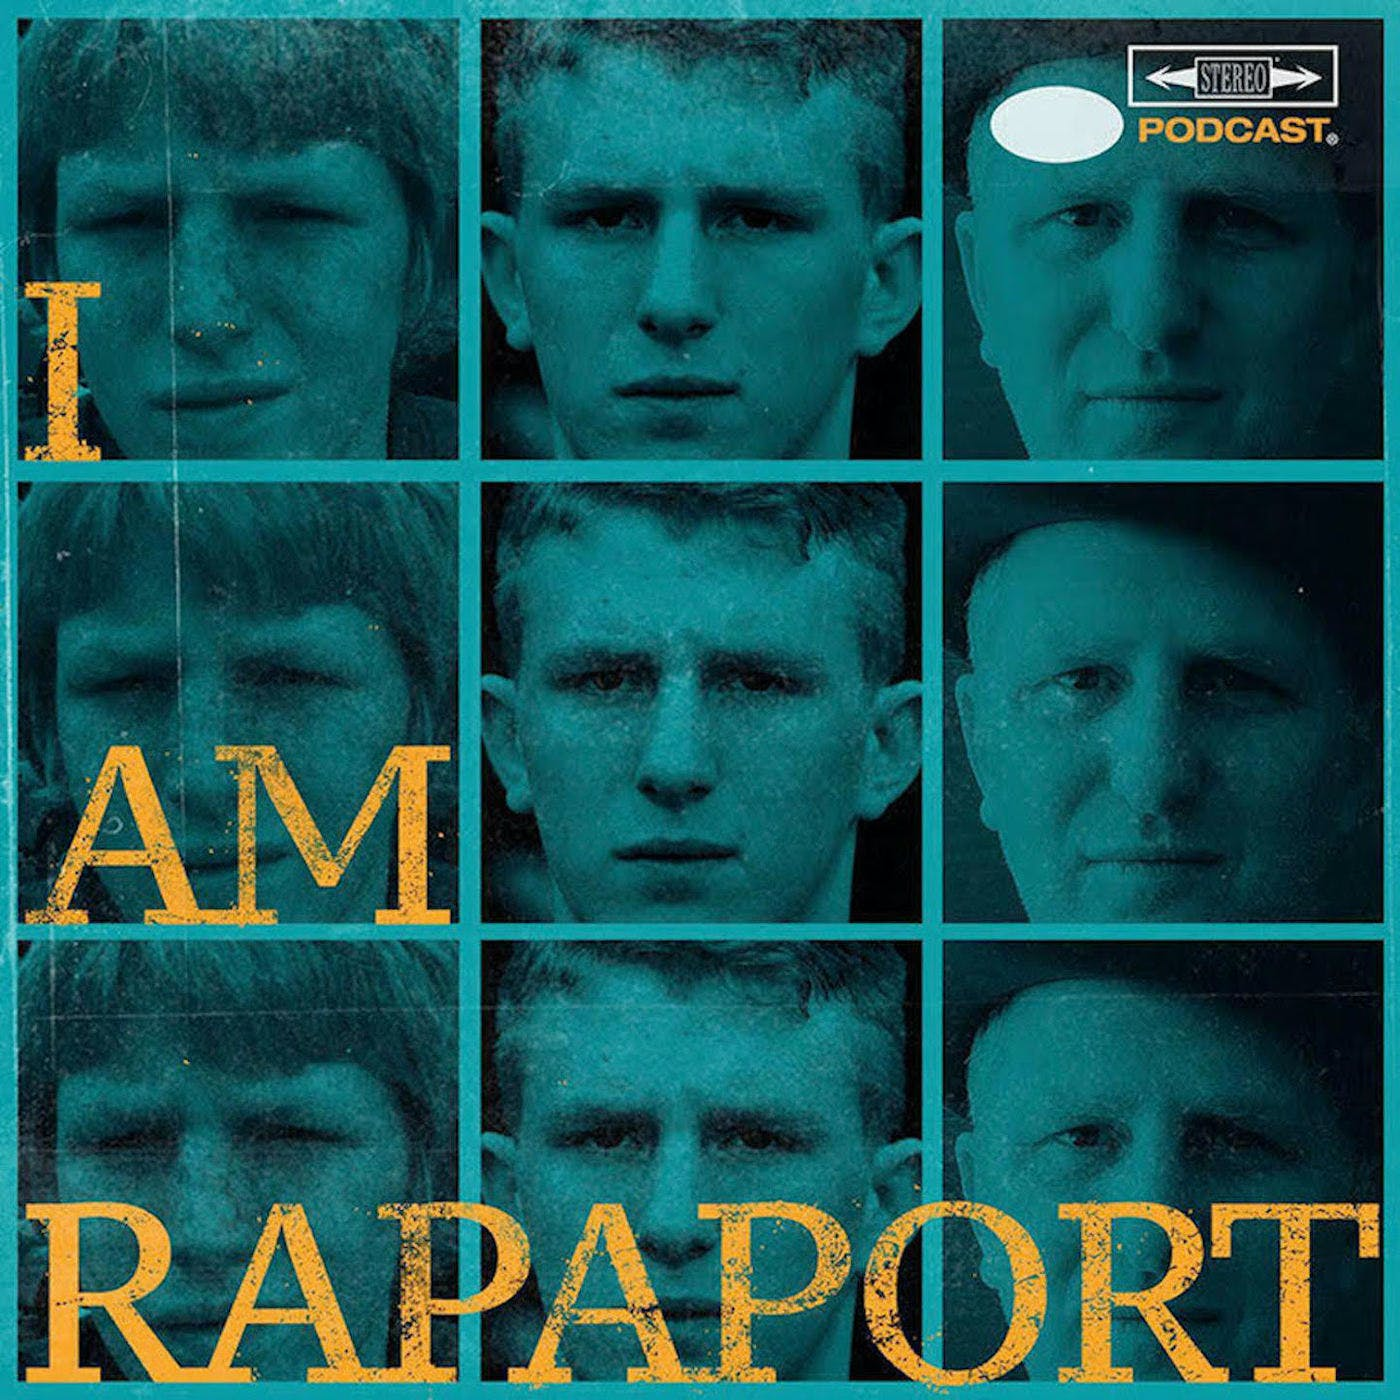 DISS TRACK EP 269 - MICHAEL RAPAPORT WANTS THAT ACTION FROM THE CUPCAKE KID AKA DAN LE BATARD AND HIS CRONIES